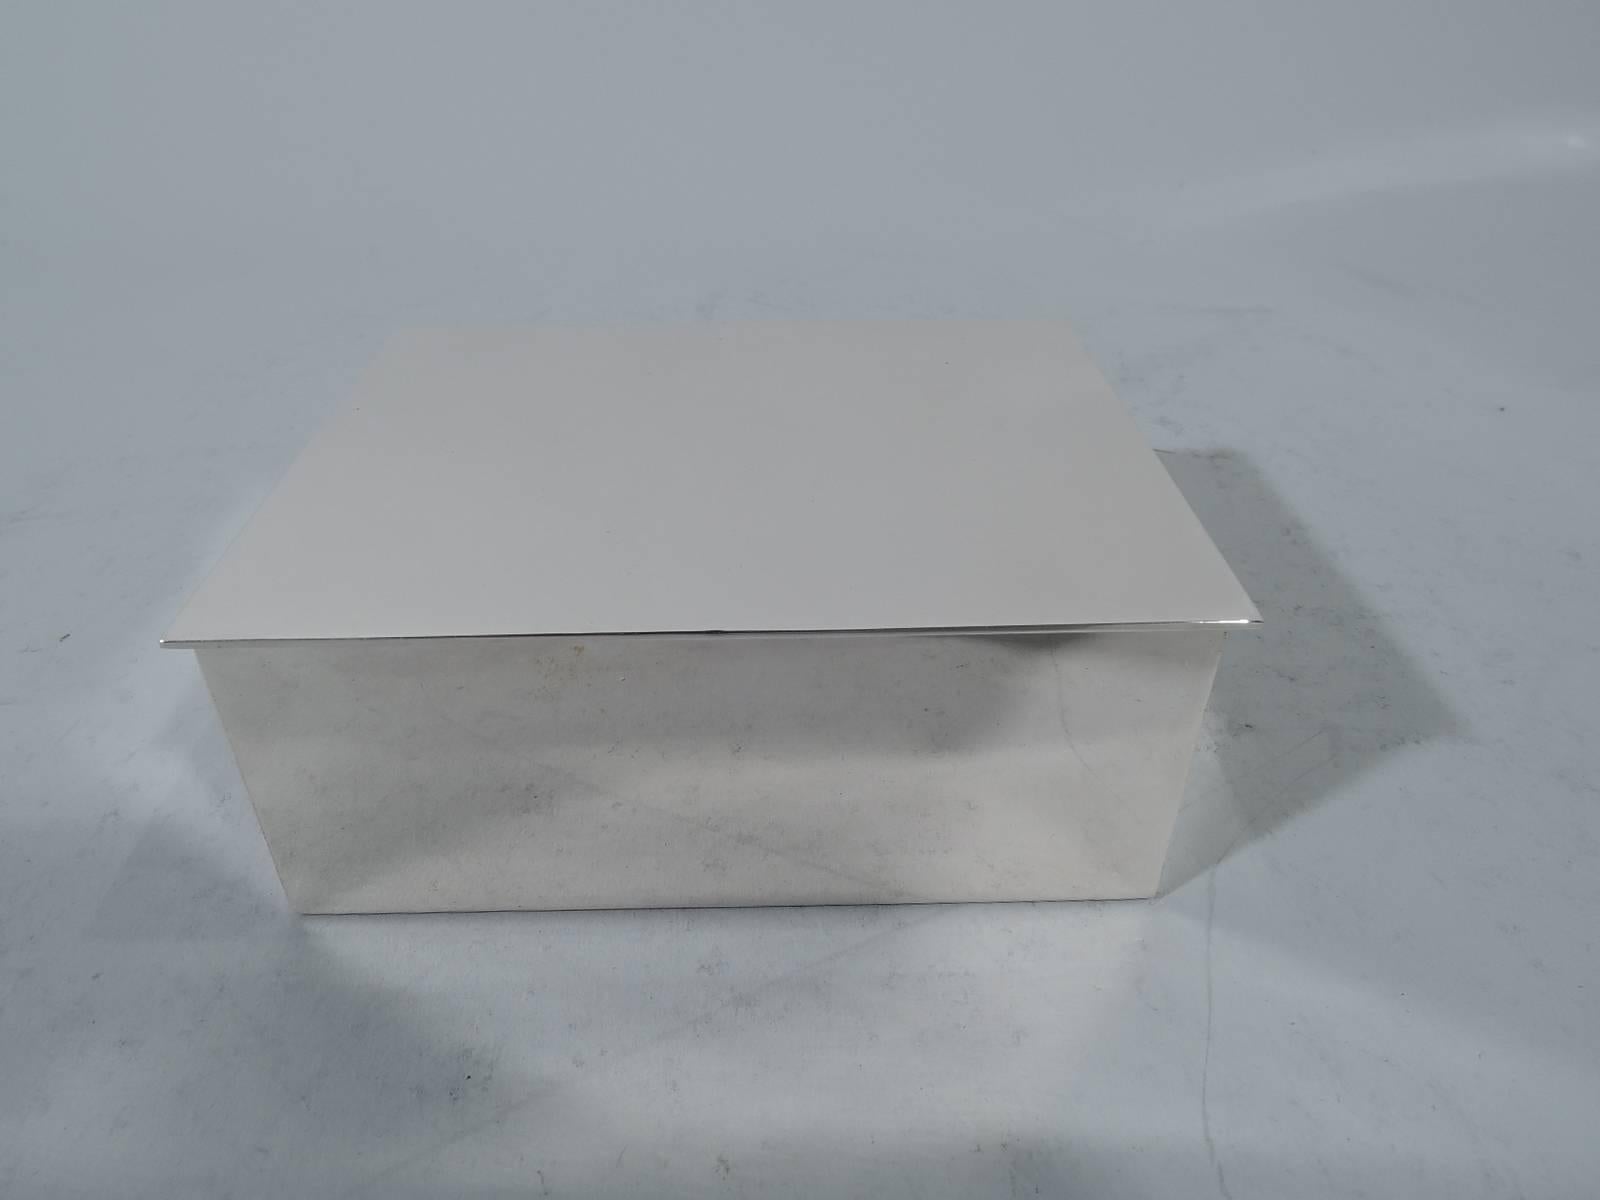 Modern sterling silver desk box. Made by Tiffany & Co. in New York. Rectangular with straight sides and sharp corners. Cover hinged and flat with minor overhang. Box interior cedar lined. Hallmark includes postwar pattern no. 23325. Gross weight: